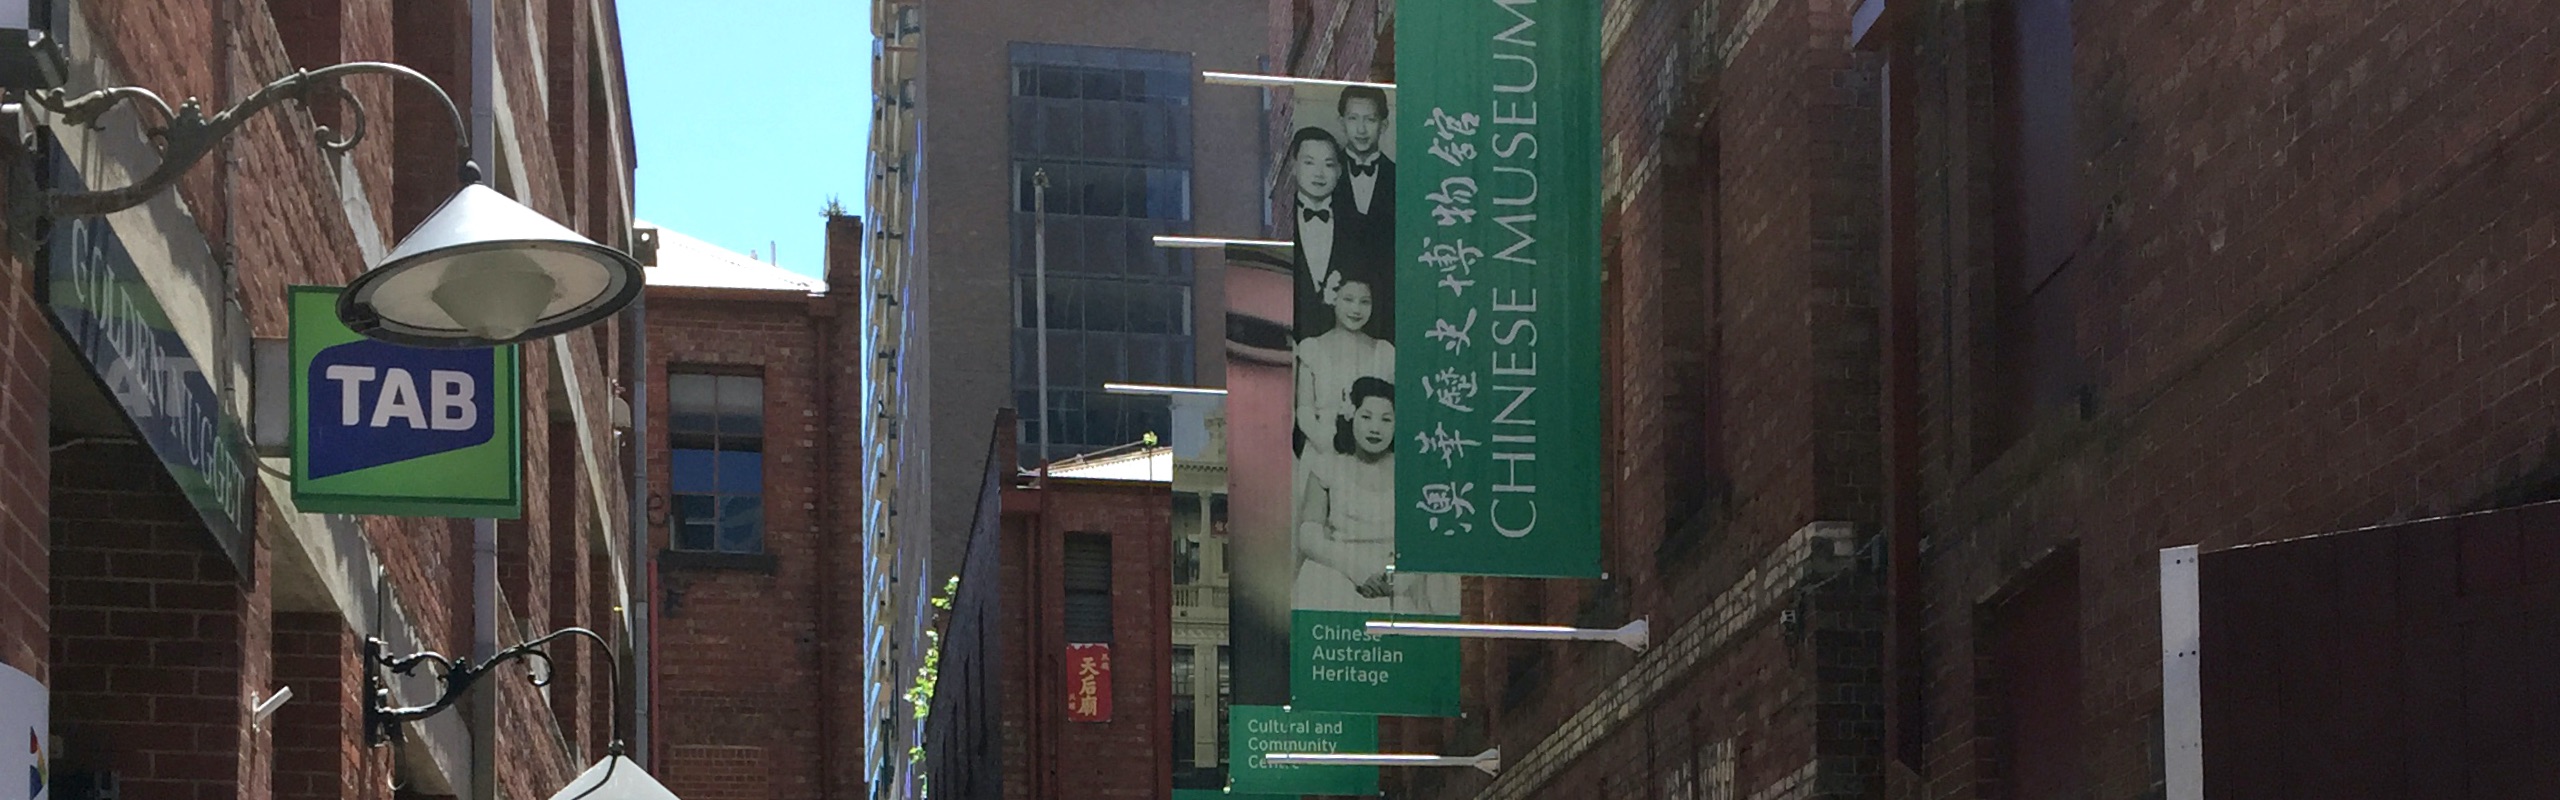 Melbourne Chinese Museum 2017